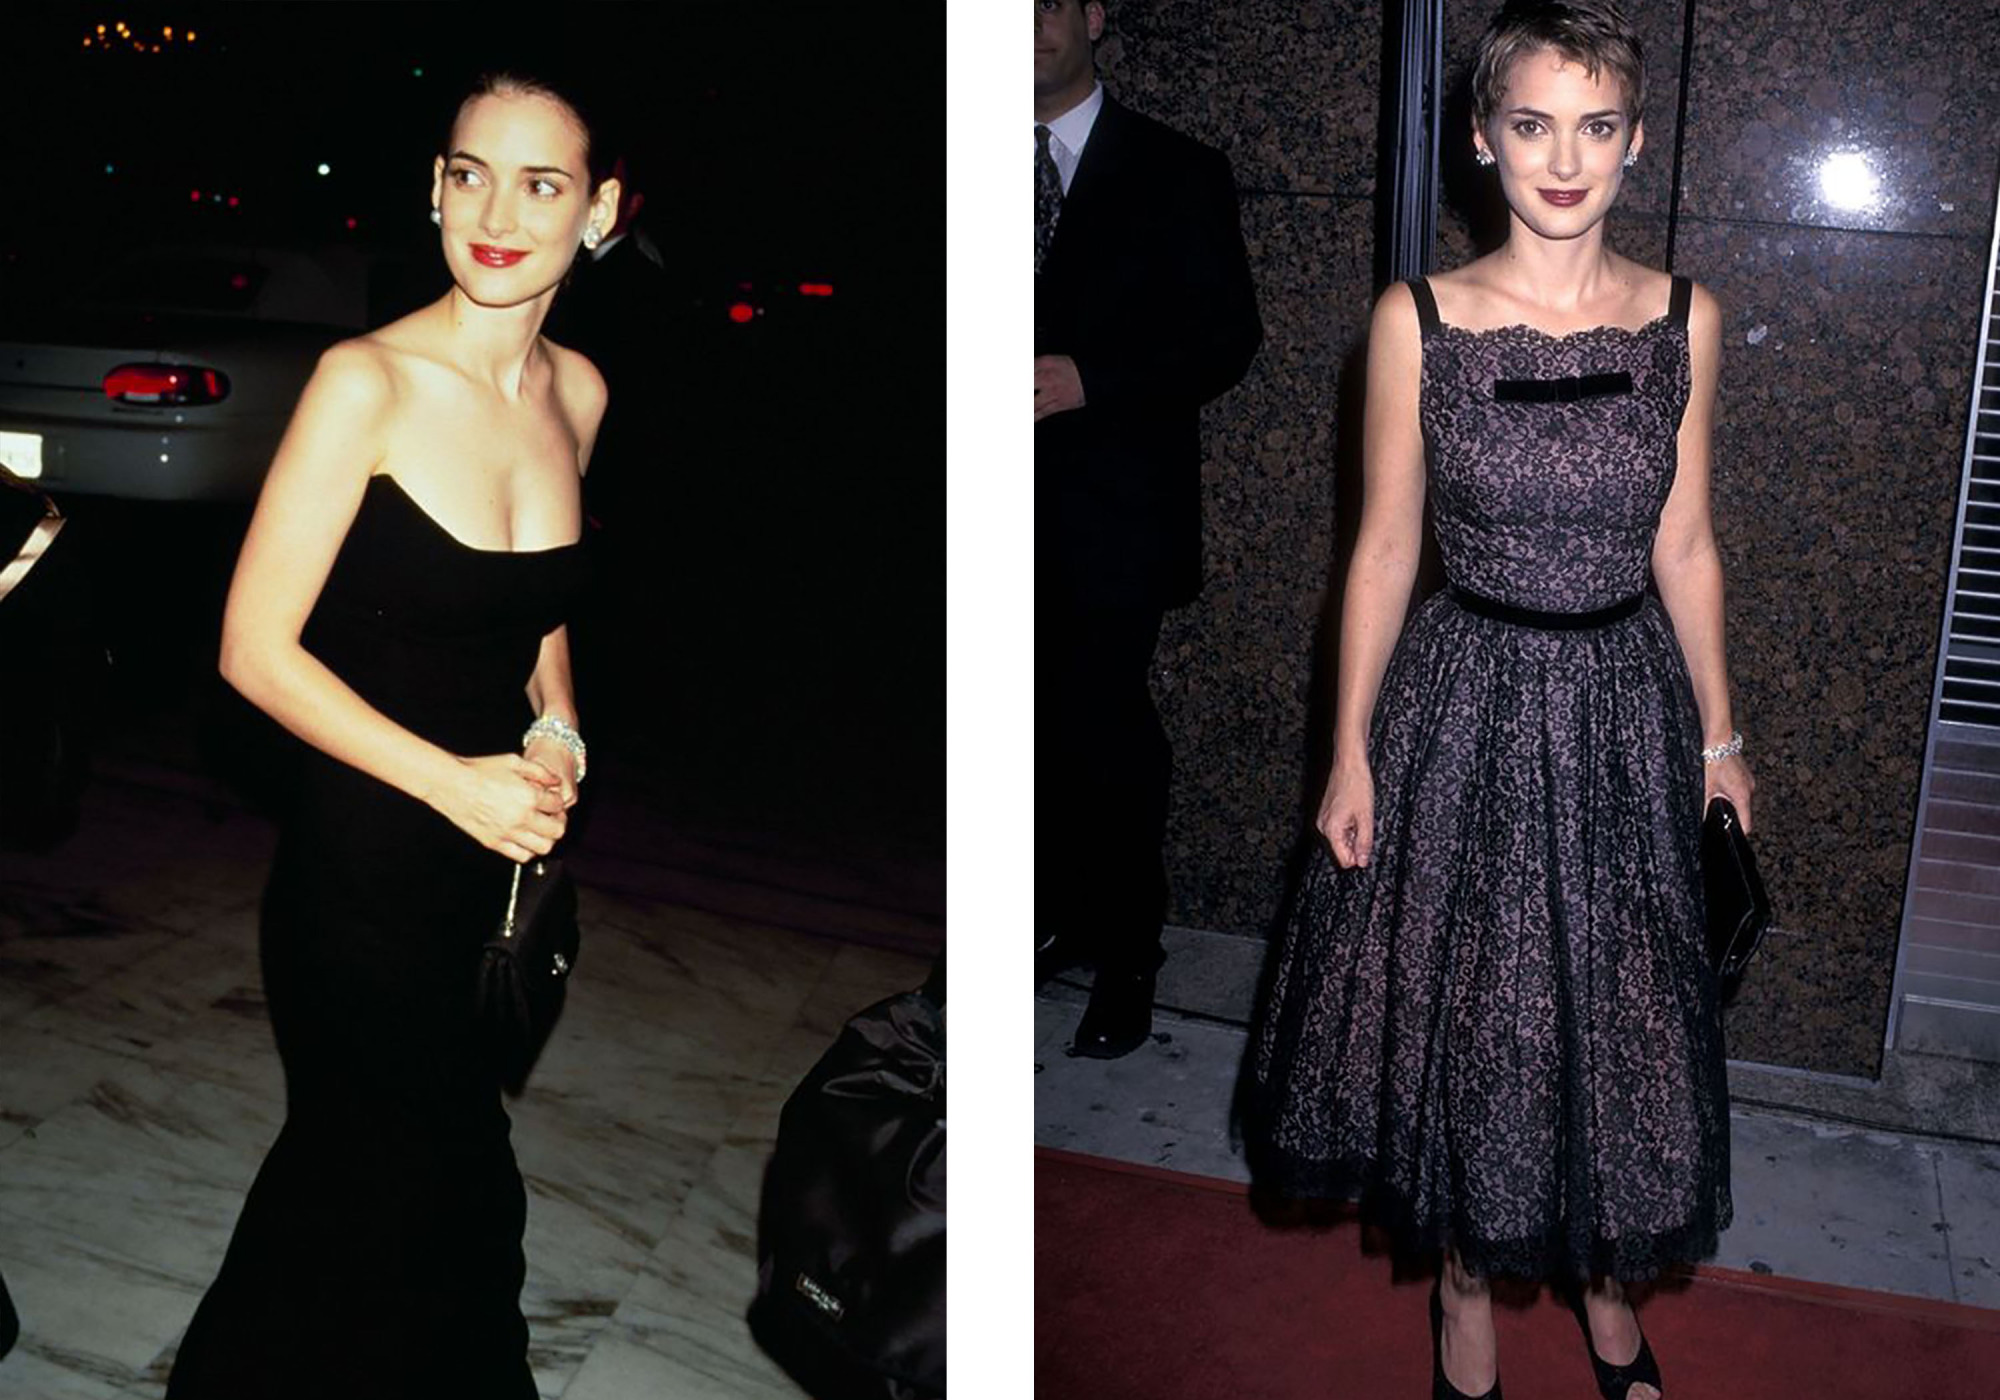 Steal Her Style! The Best Of Winona Ryder's Iconic 90's Fashion Looks